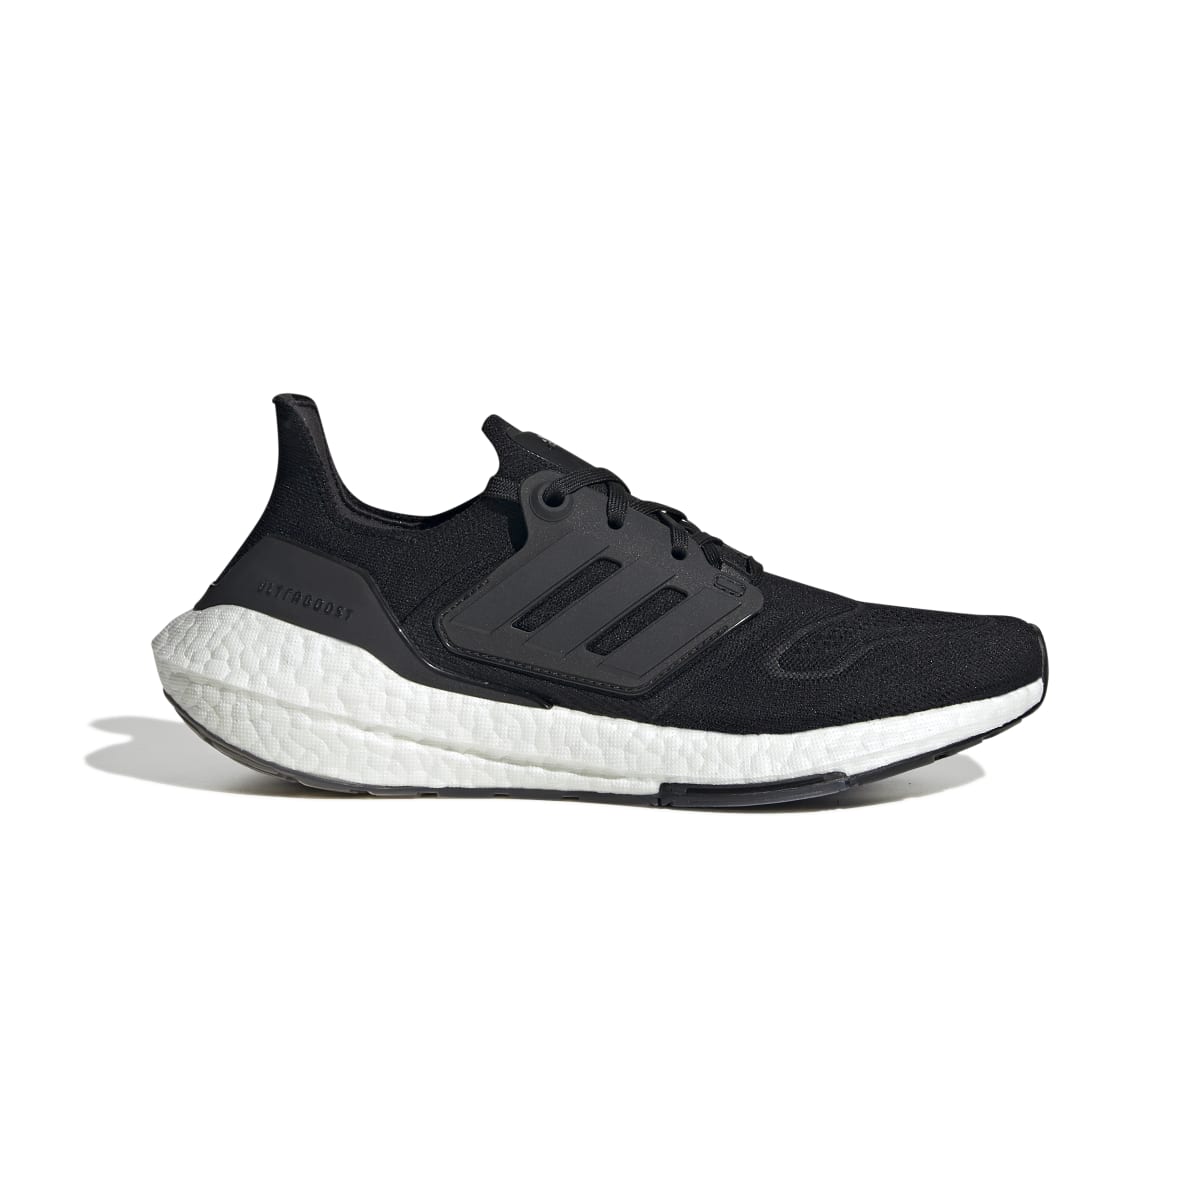 adidas Ultraboost 22 Running Shoe - Women's $56.95 with Free Shipping